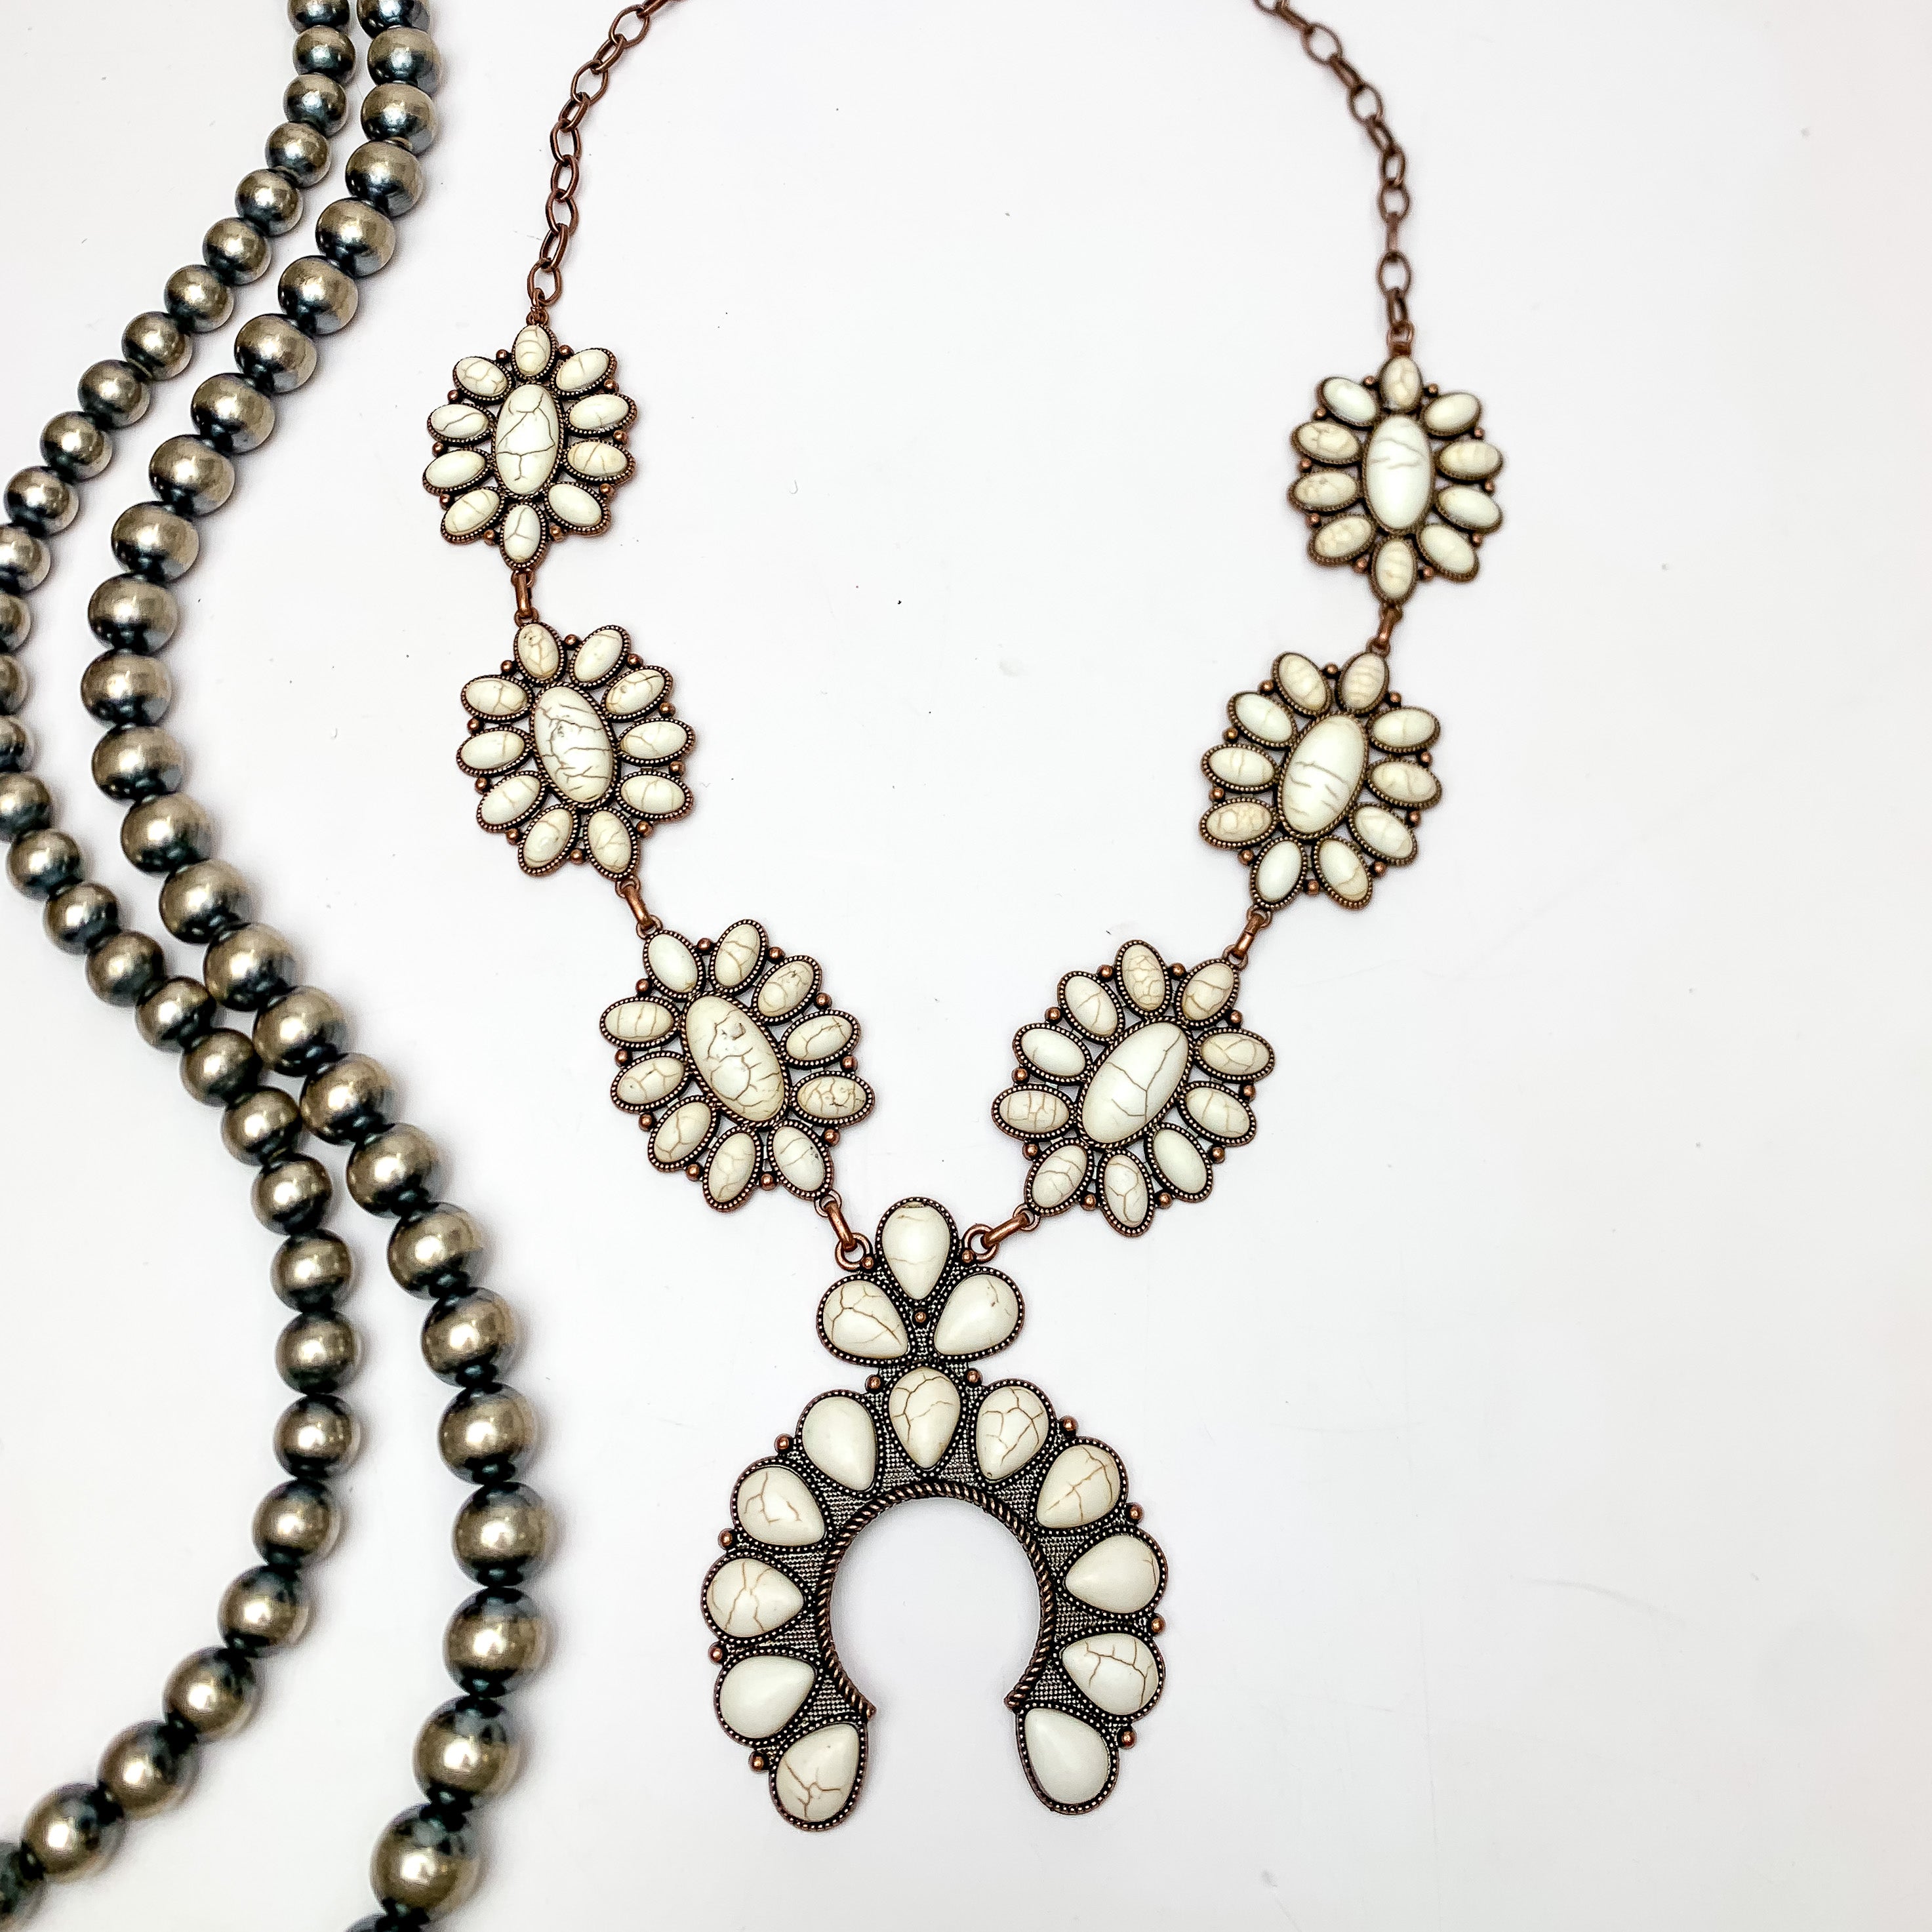 Squash Necklace with Oval Flowers in Copper Tone and White. This necklace is pictured on a white background with Navajo pearls on the left side.